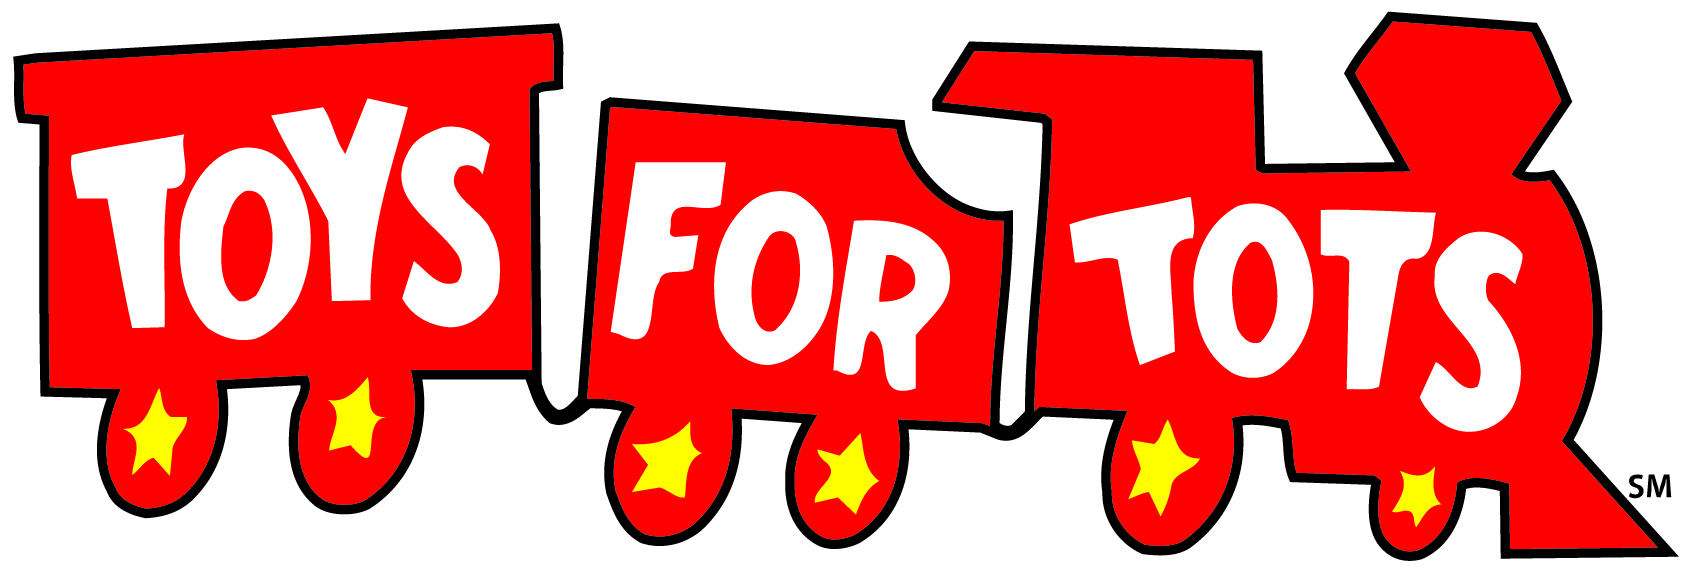 pile Child Feudal Toys For Tots Logo | gbtps